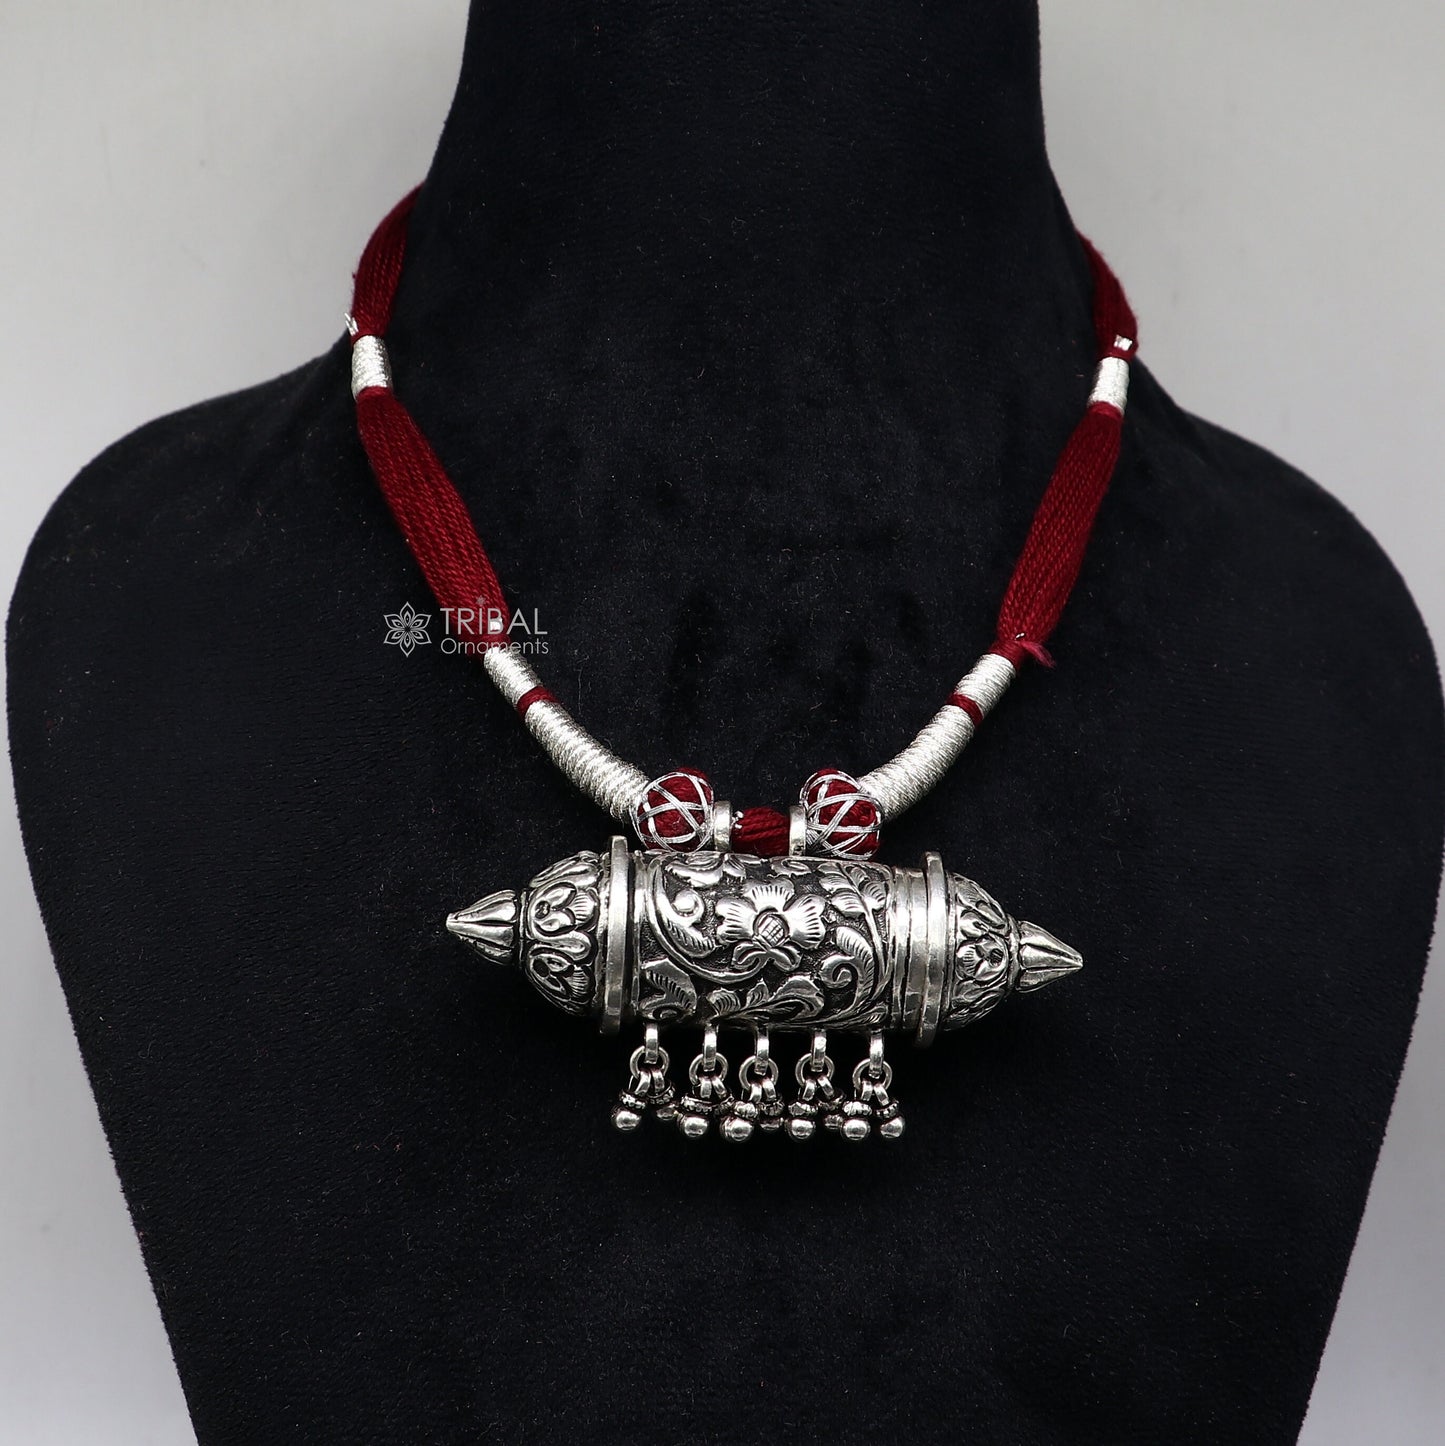 925 sterling silver amulet taviz pendant tribal ethnic necklace adjust with back thread knot, unique cultural mantra box jewelry set638 - TRIBAL ORNAMENTS